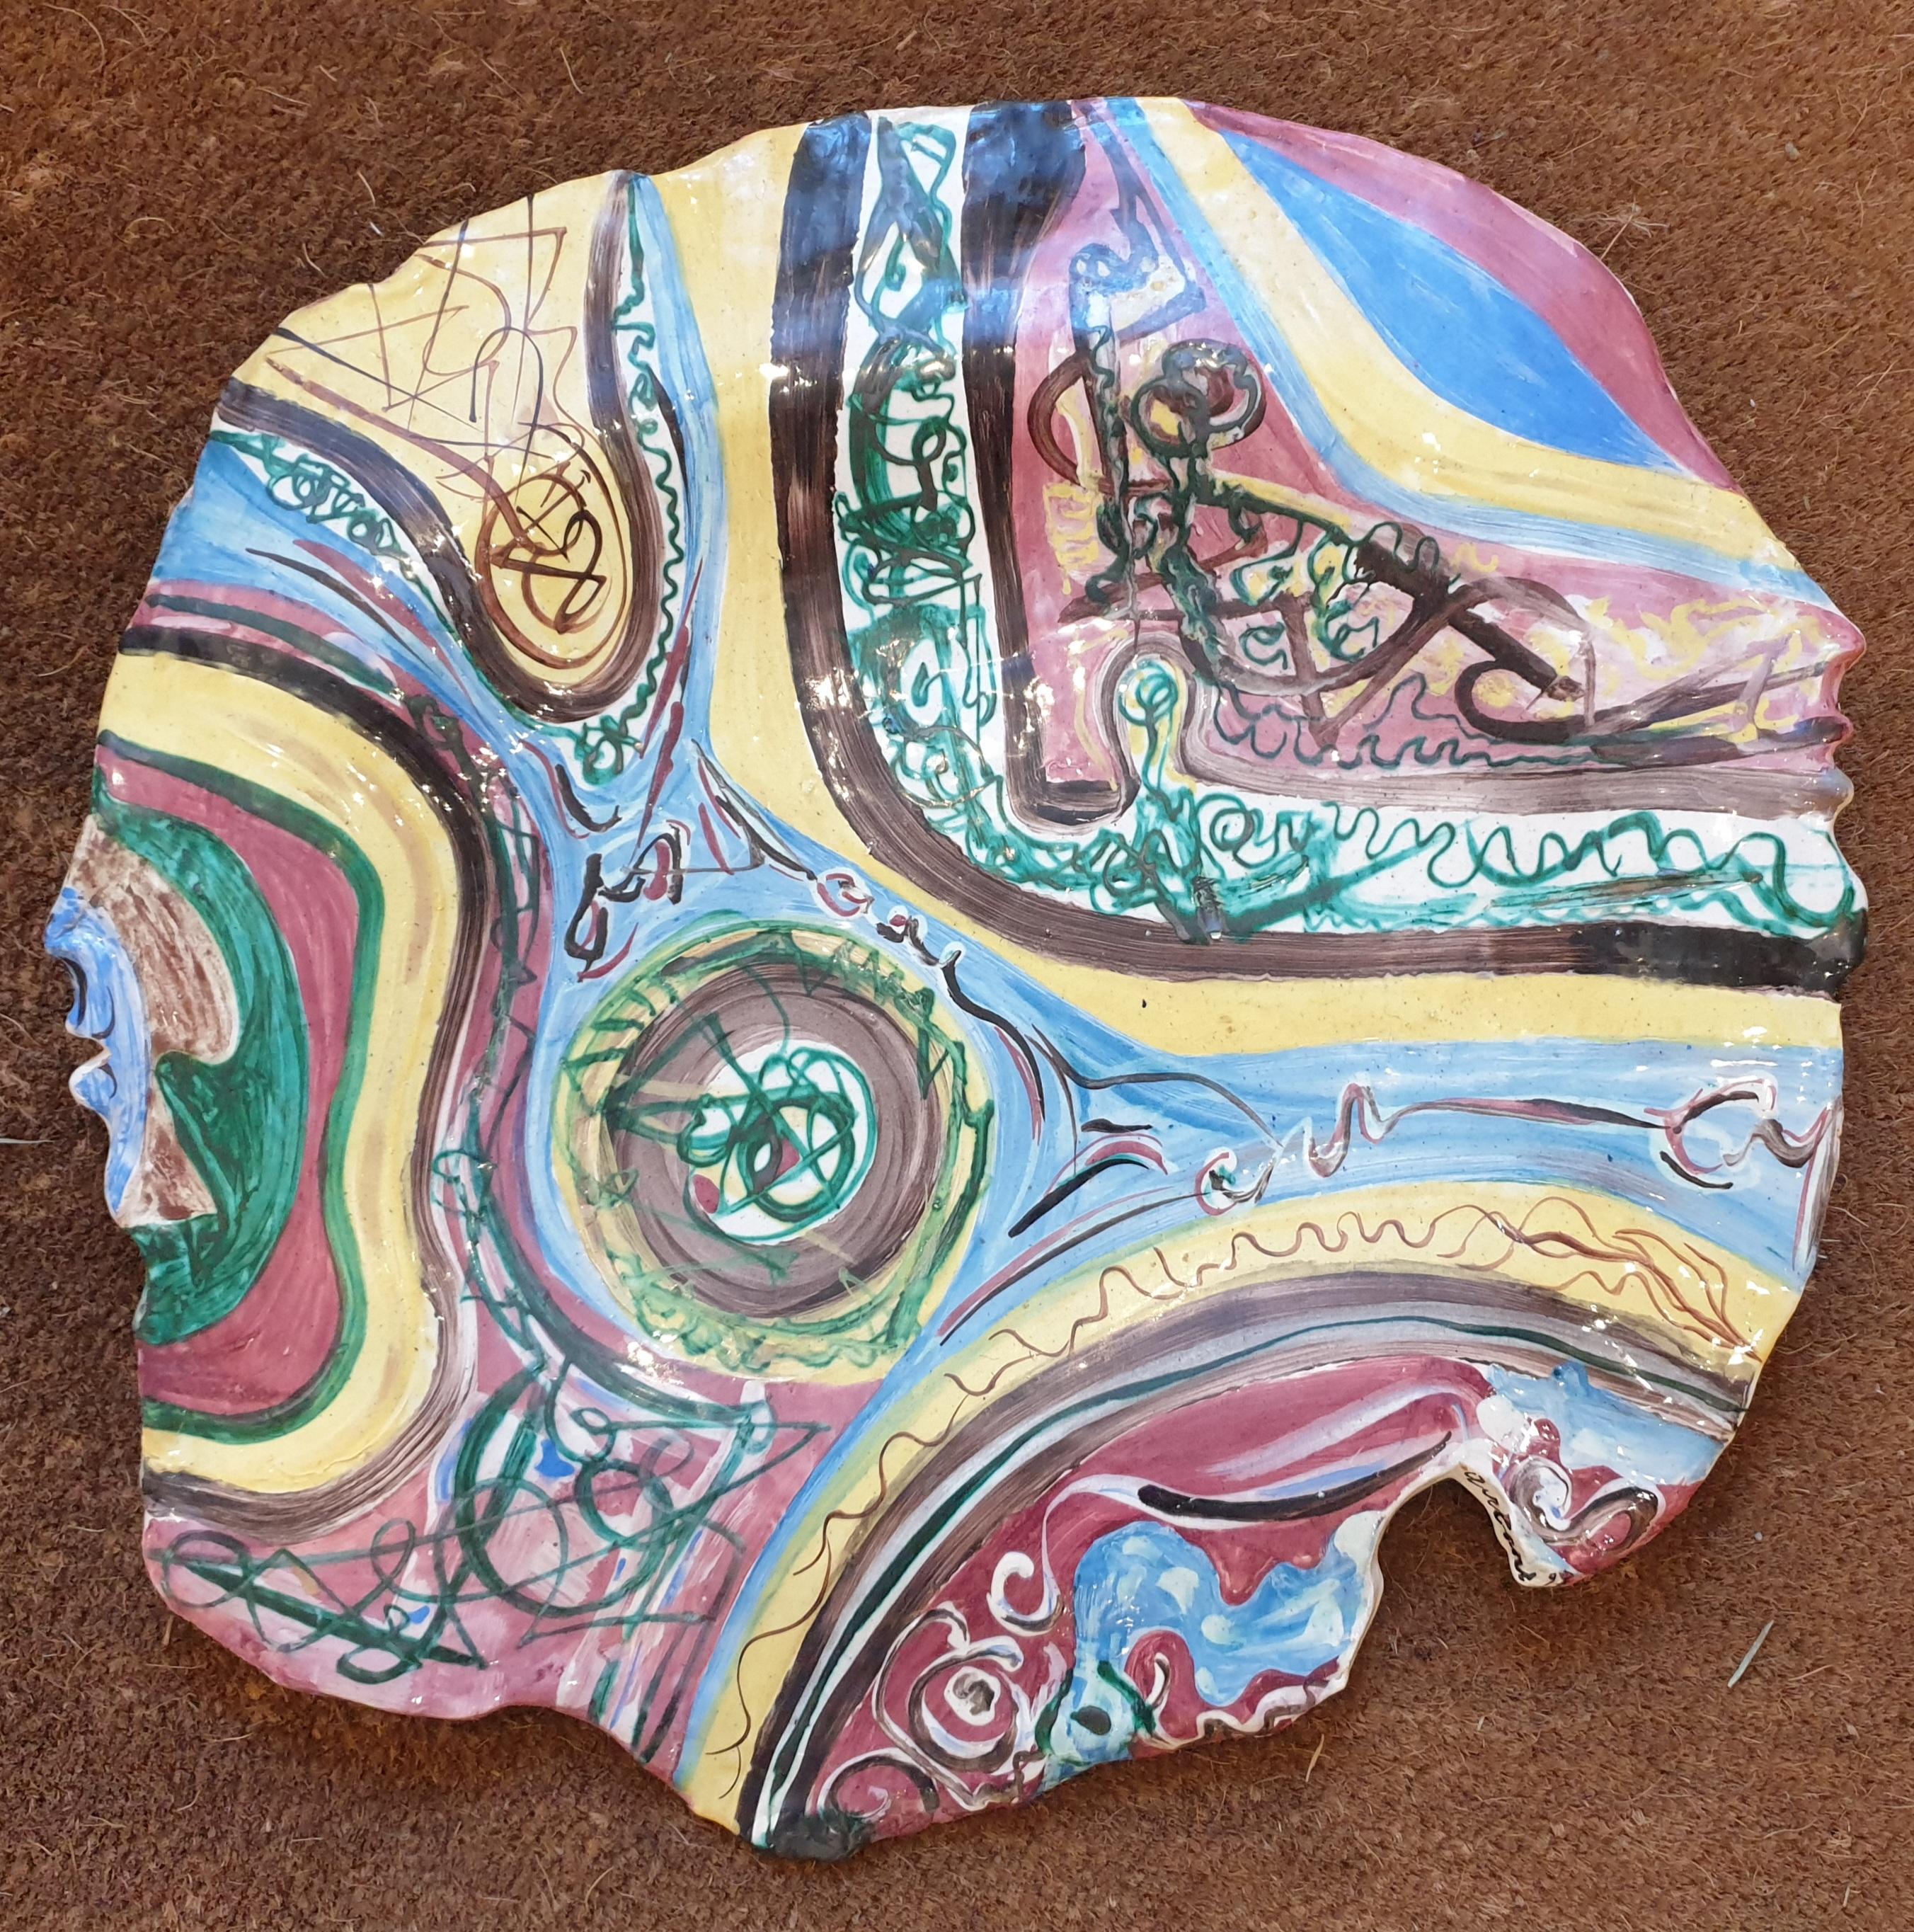 Claude Urbani Abstract Sculpture - Abstract Expressionist Etruscan Inspired Decorative Ceramic.